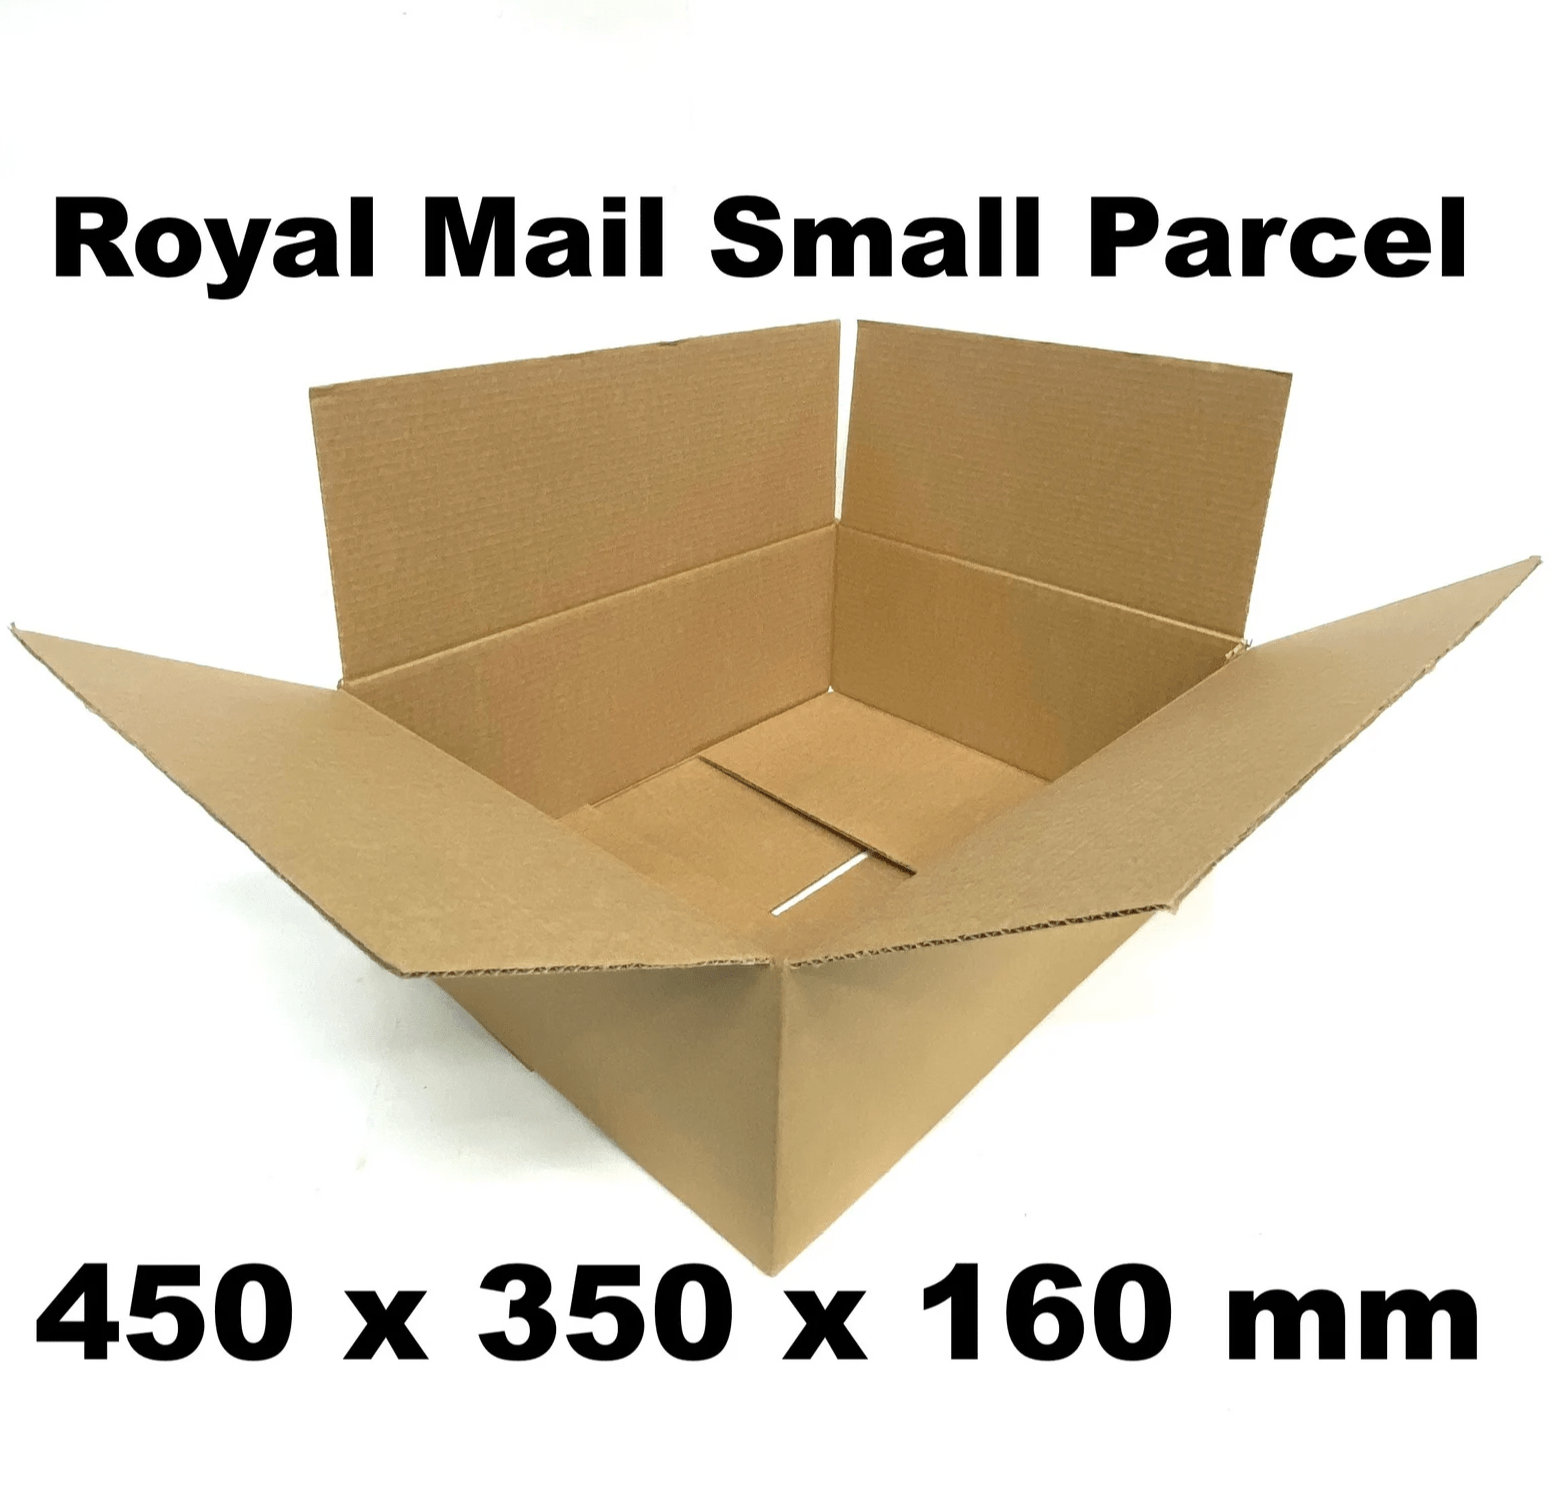 100 x Maximum Size Royal Mail Small Parcel   45 x 35 x 16cm - High Quality Recycled Once-Used Cardboard Boxes online - Black Country Boxes